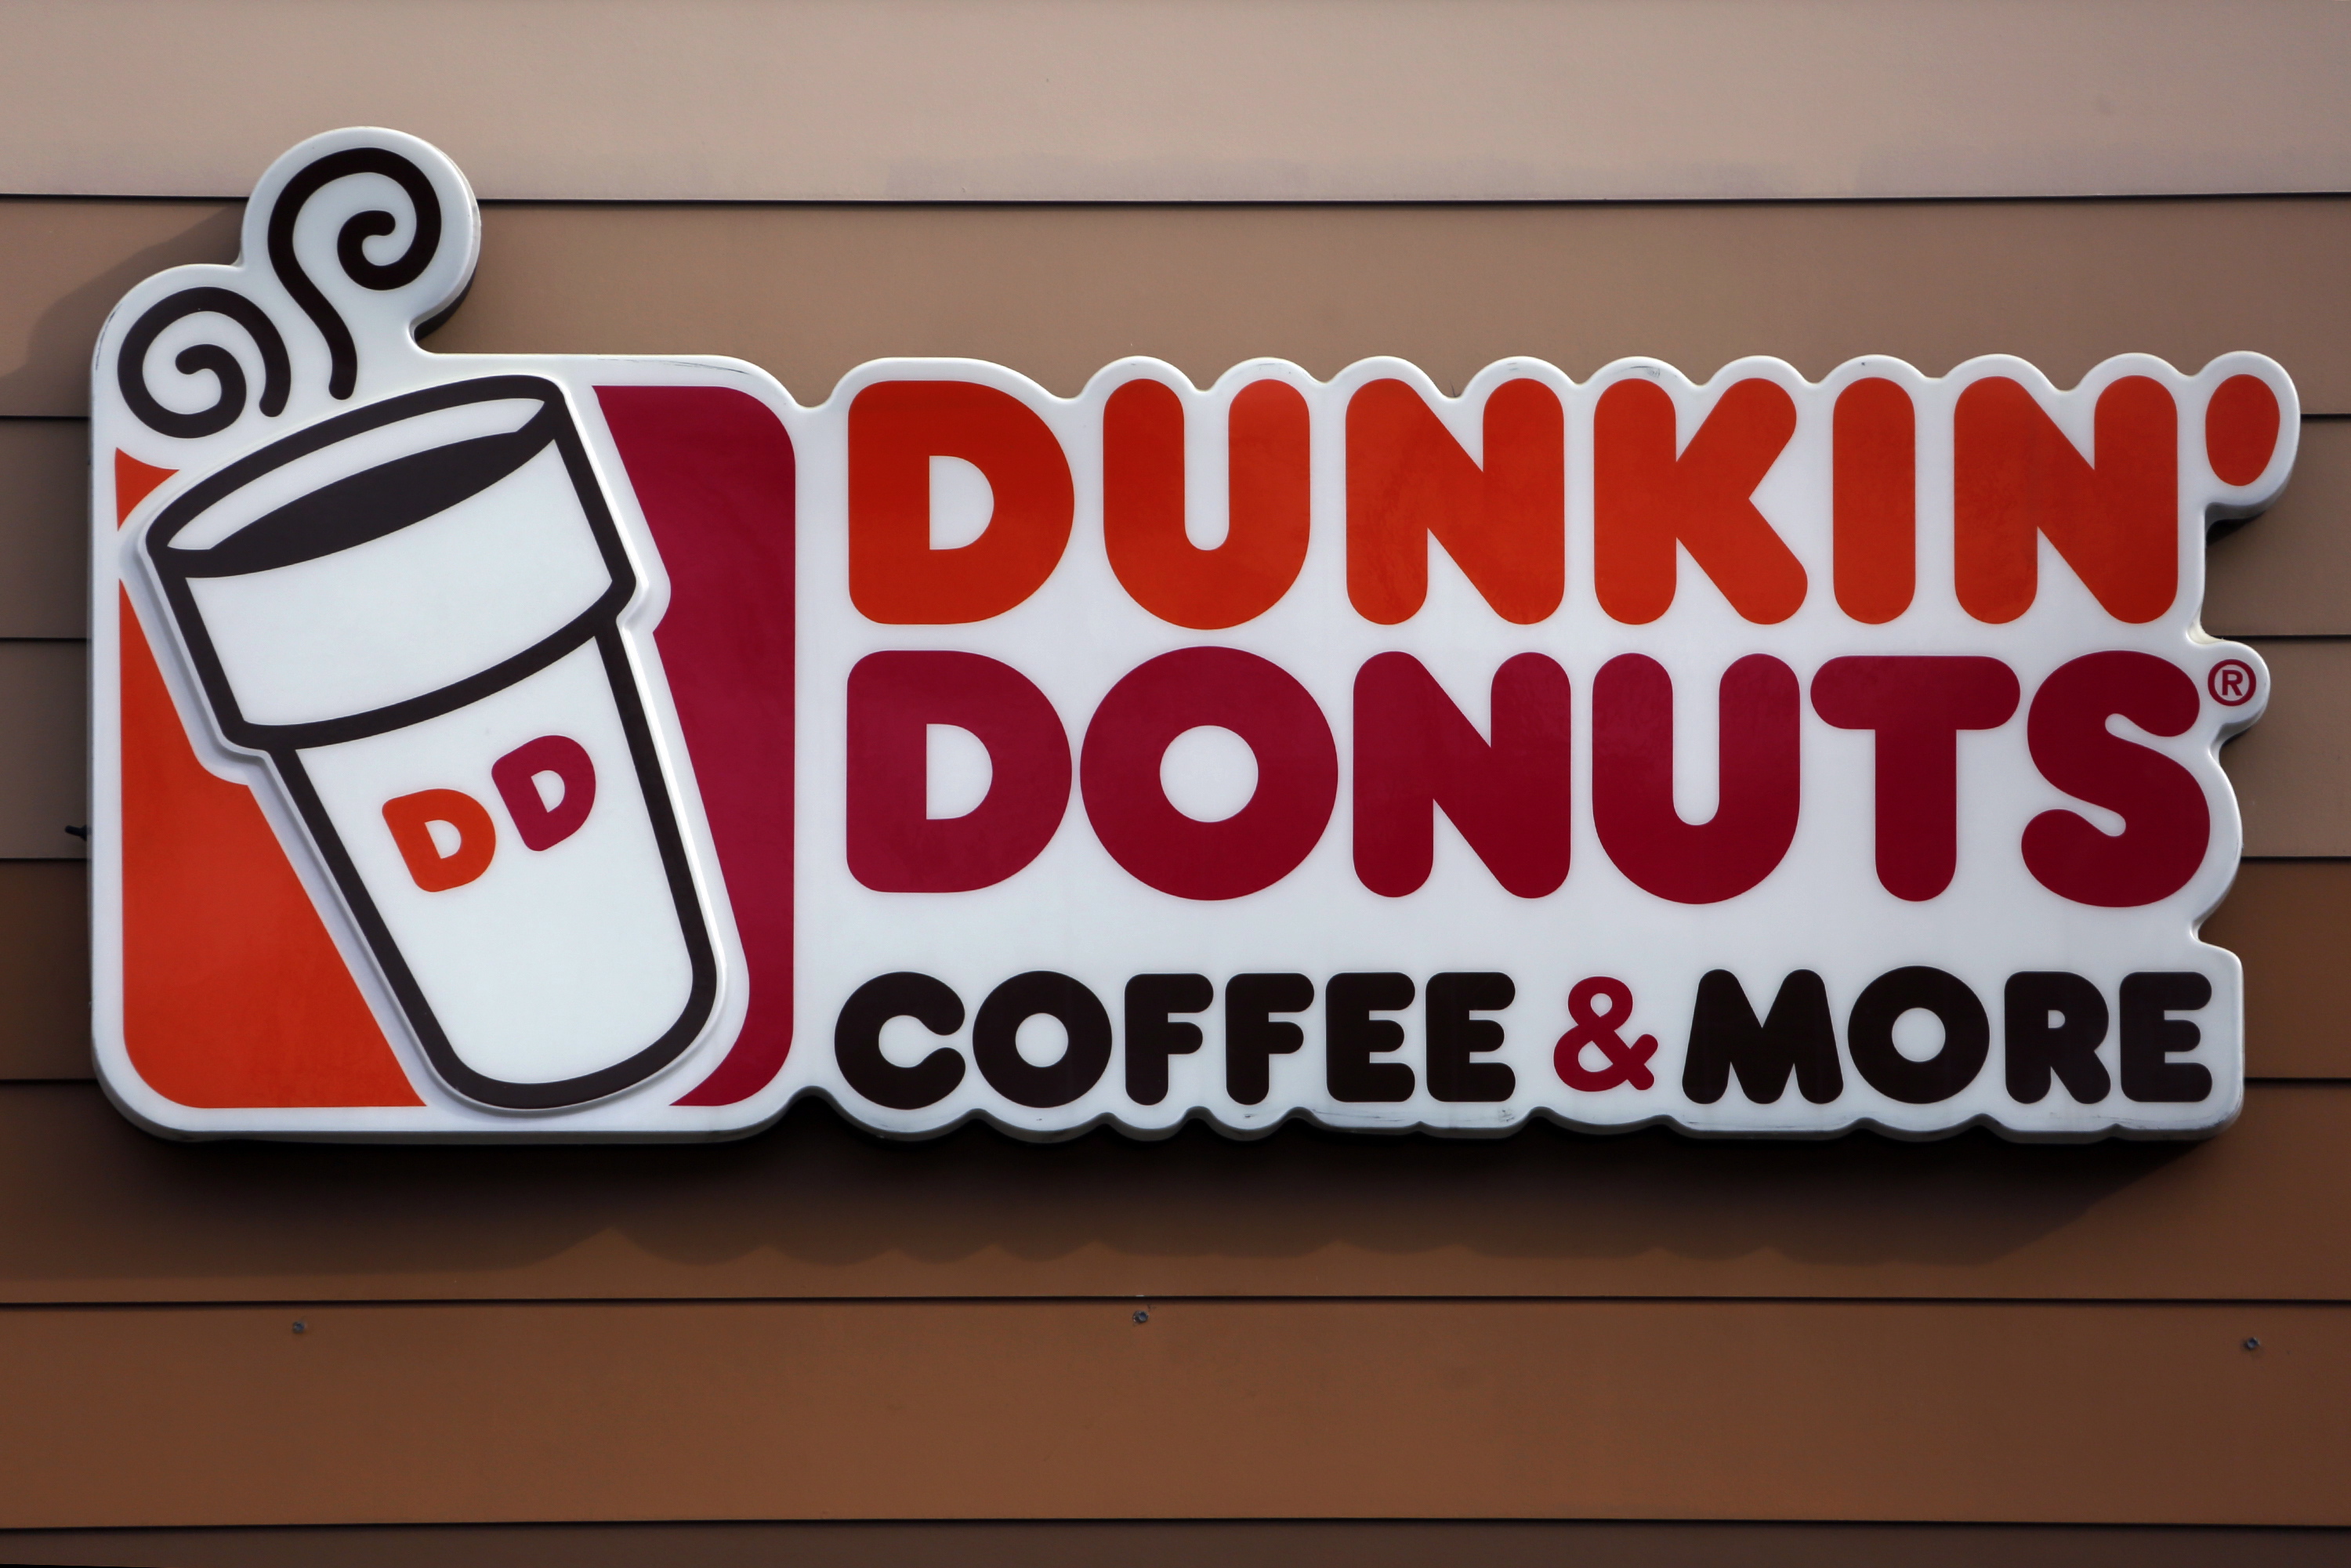 Just Dunkin': Dunkin' Donuts to change its name